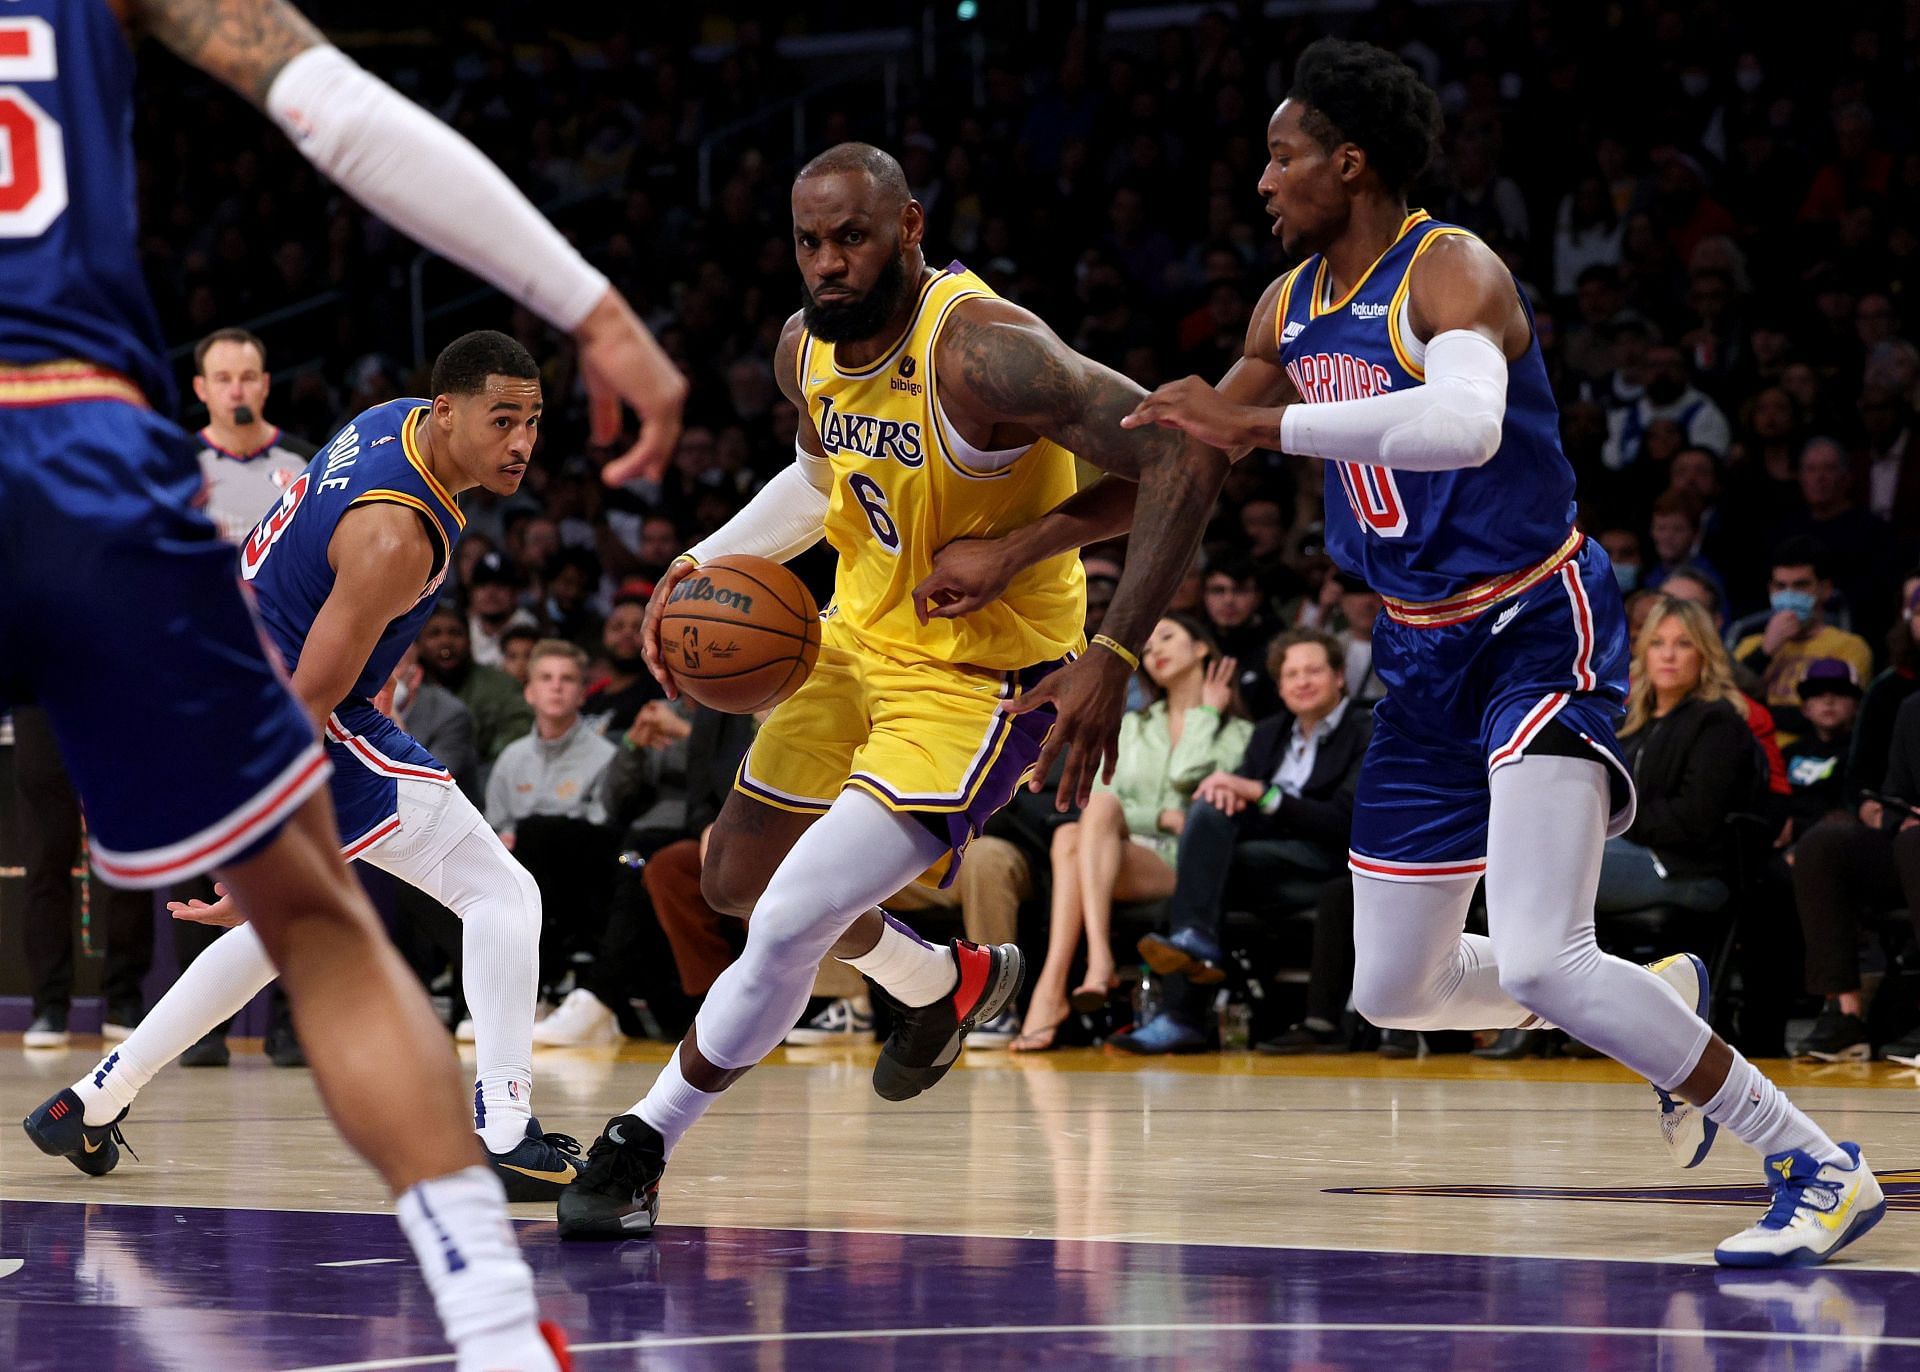 LeBron James scored 56 points to lead LA Lakers to a win against the Golden State Warriors on Saturday.